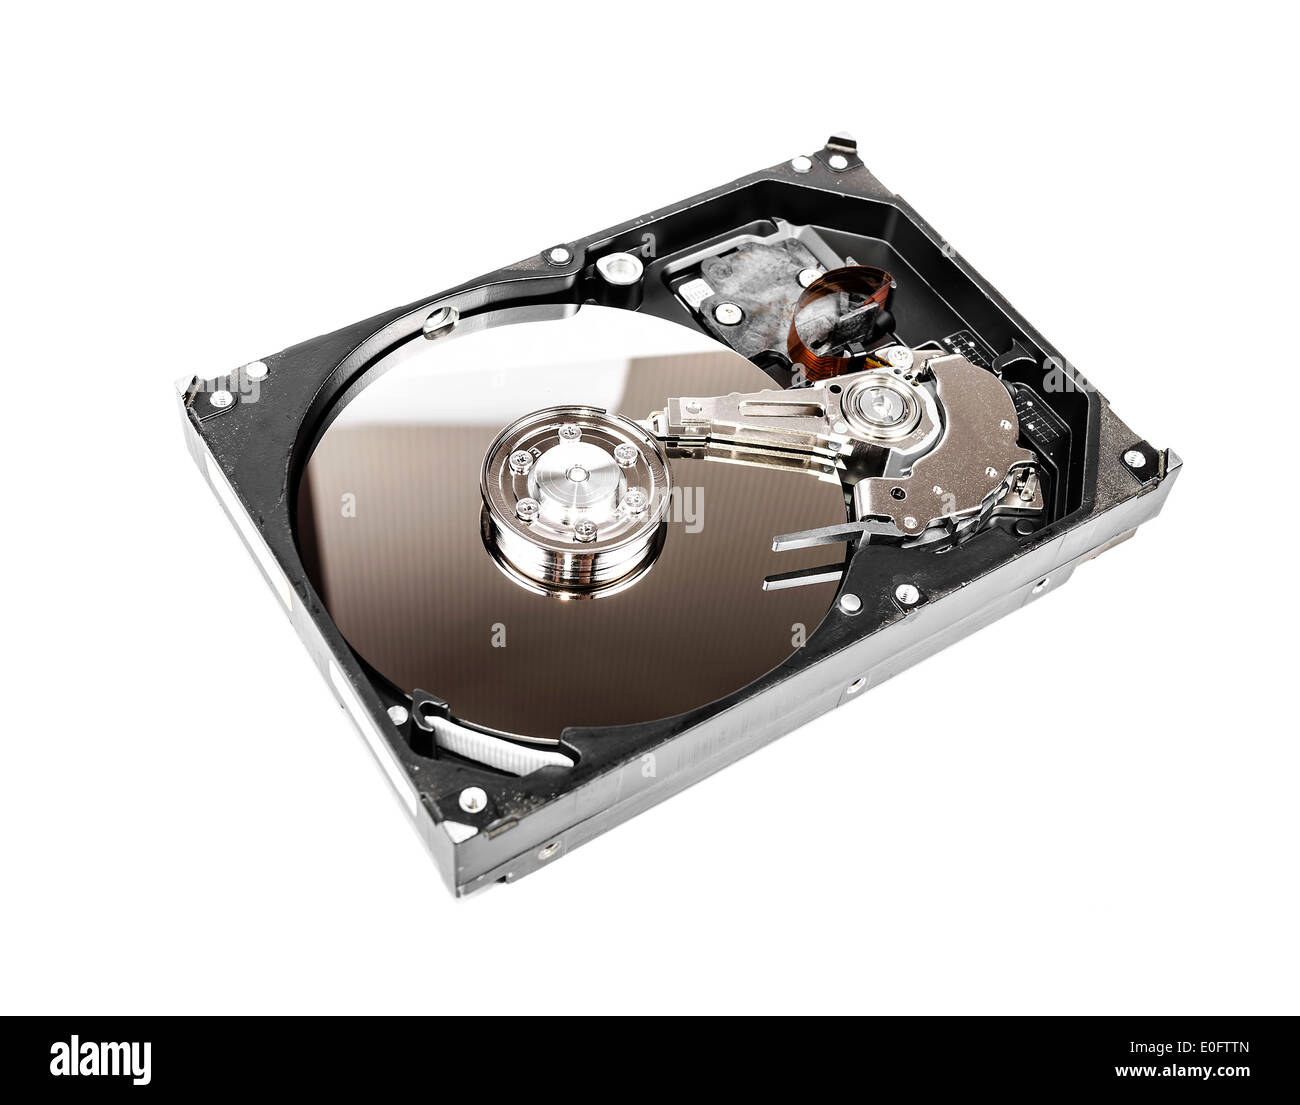 Opened Computer hard disk drive isolated on white Stock Photo